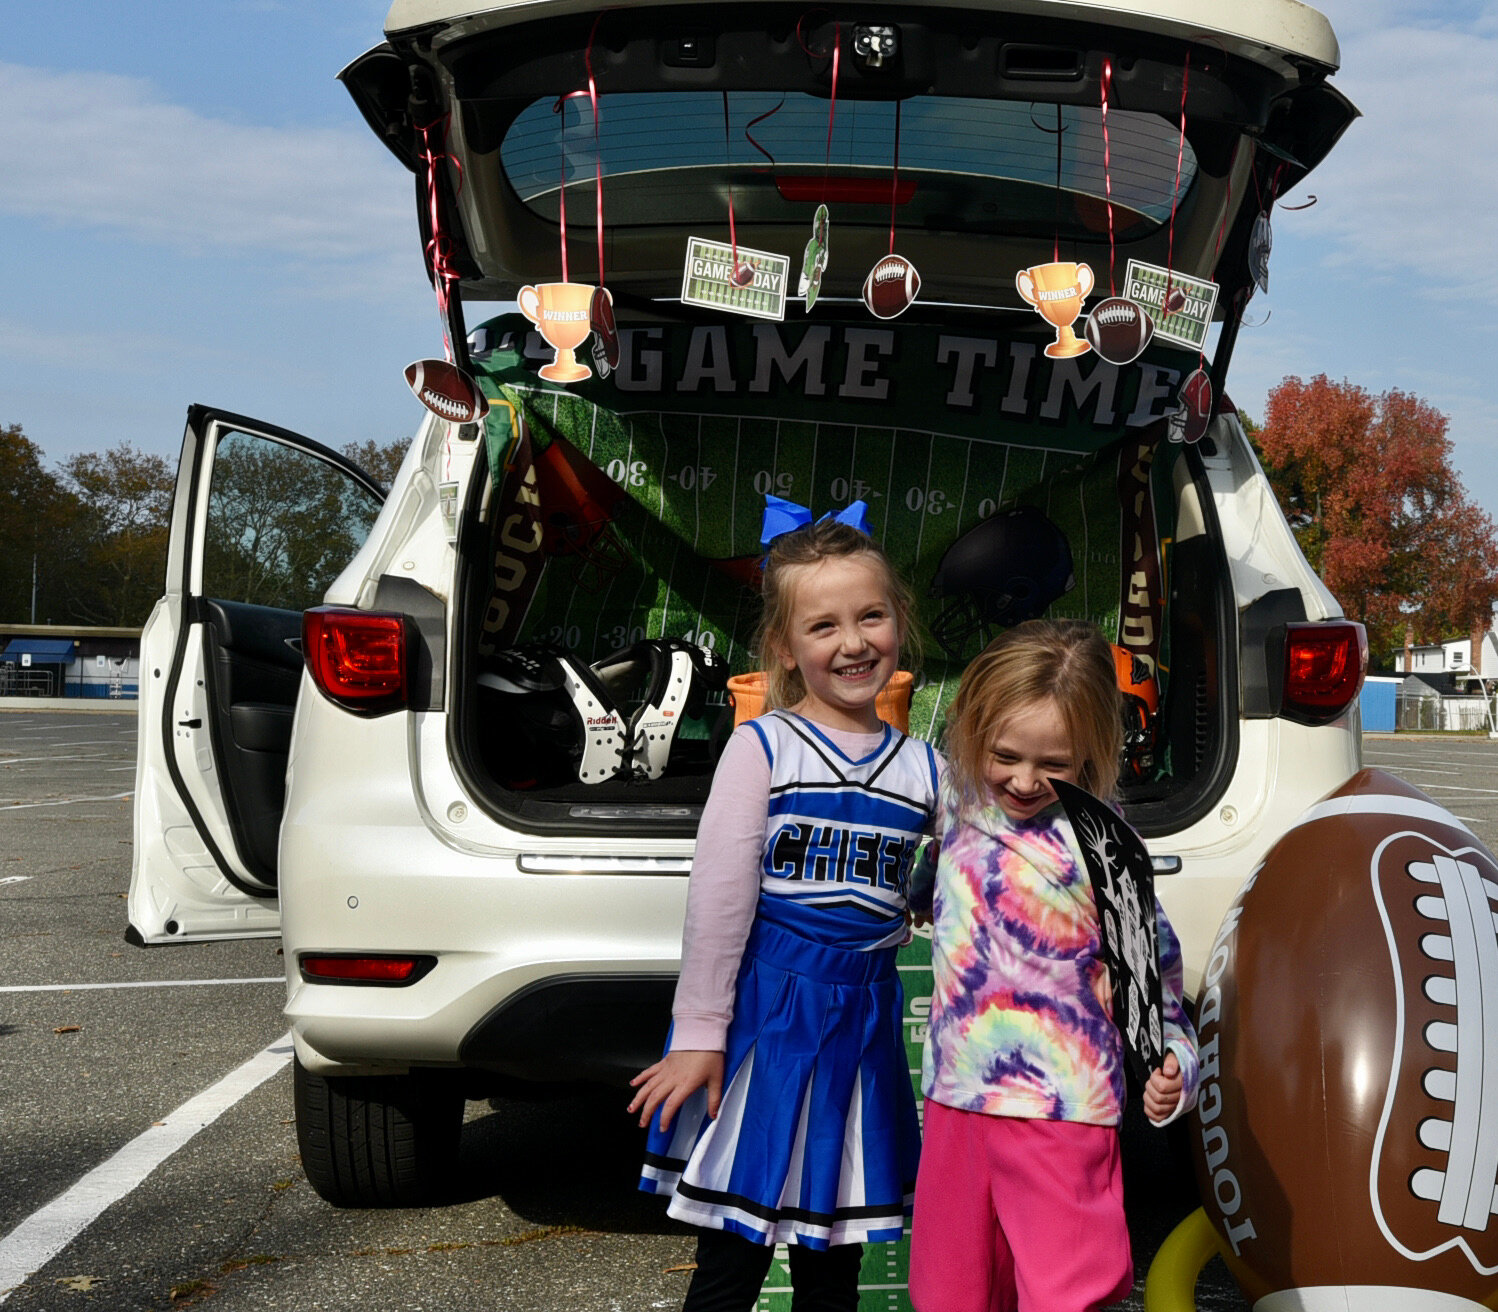 Ellie Curran, 4, and Abigail Dray, 5, were game-time ready at the trunk-or-treat hosted by the Franklin Square Kiwanis Club last weekend.